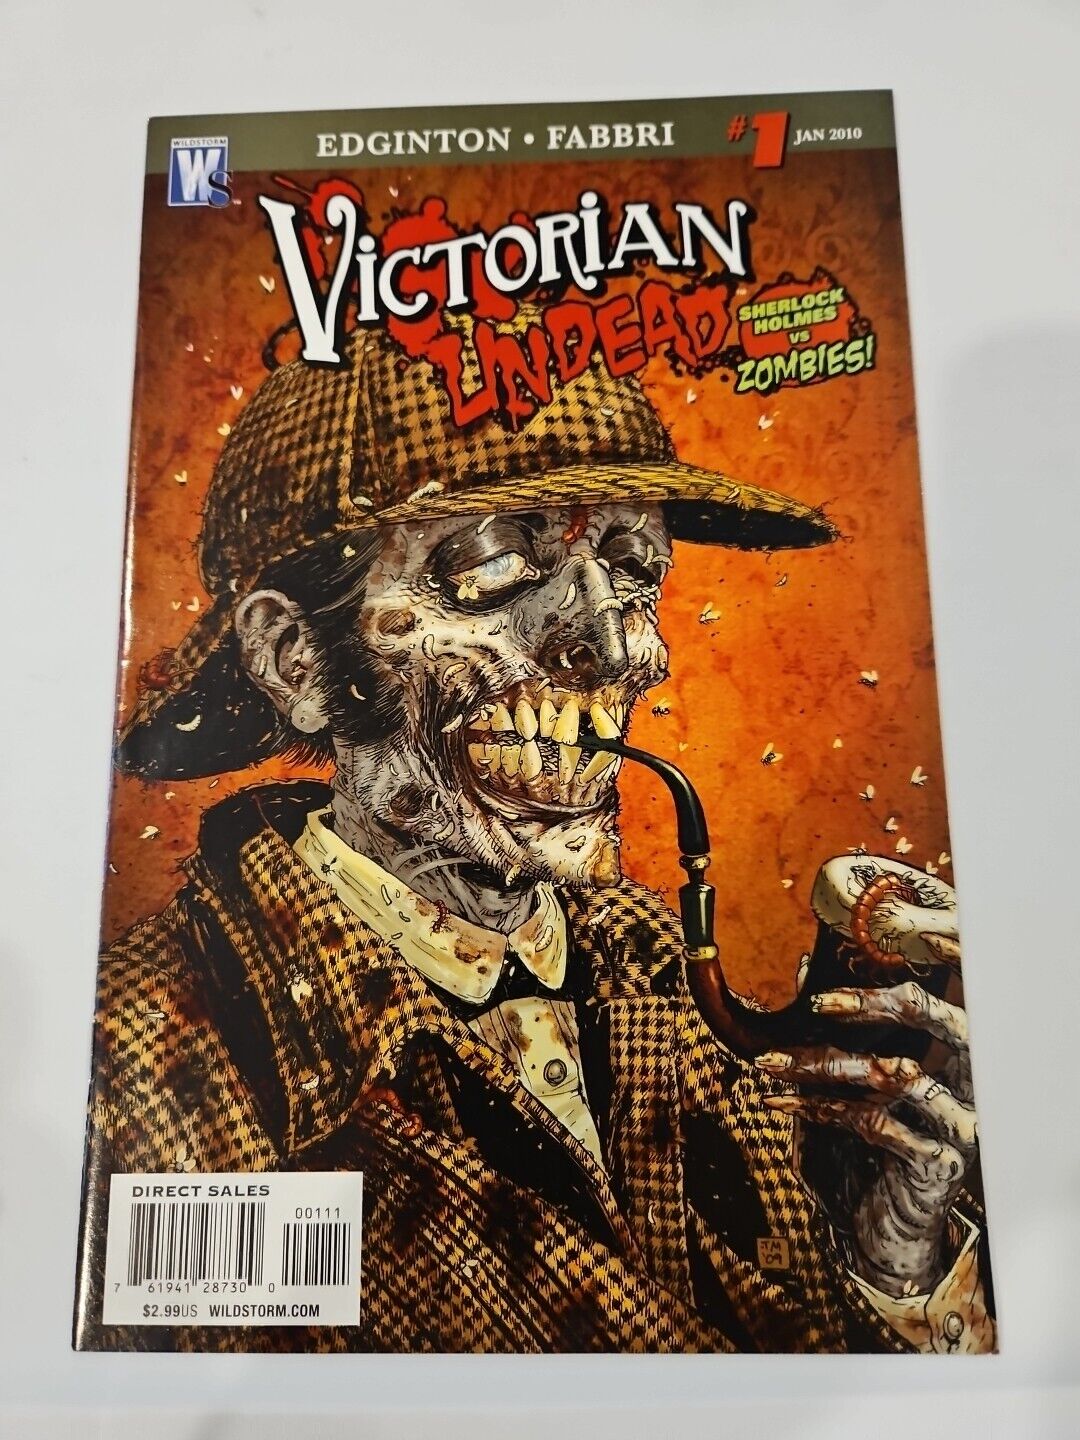 Victorian Undead #1 SHERLOCK HOLMES Zombies 2010 DC Wildstorm COVER VARIANT A